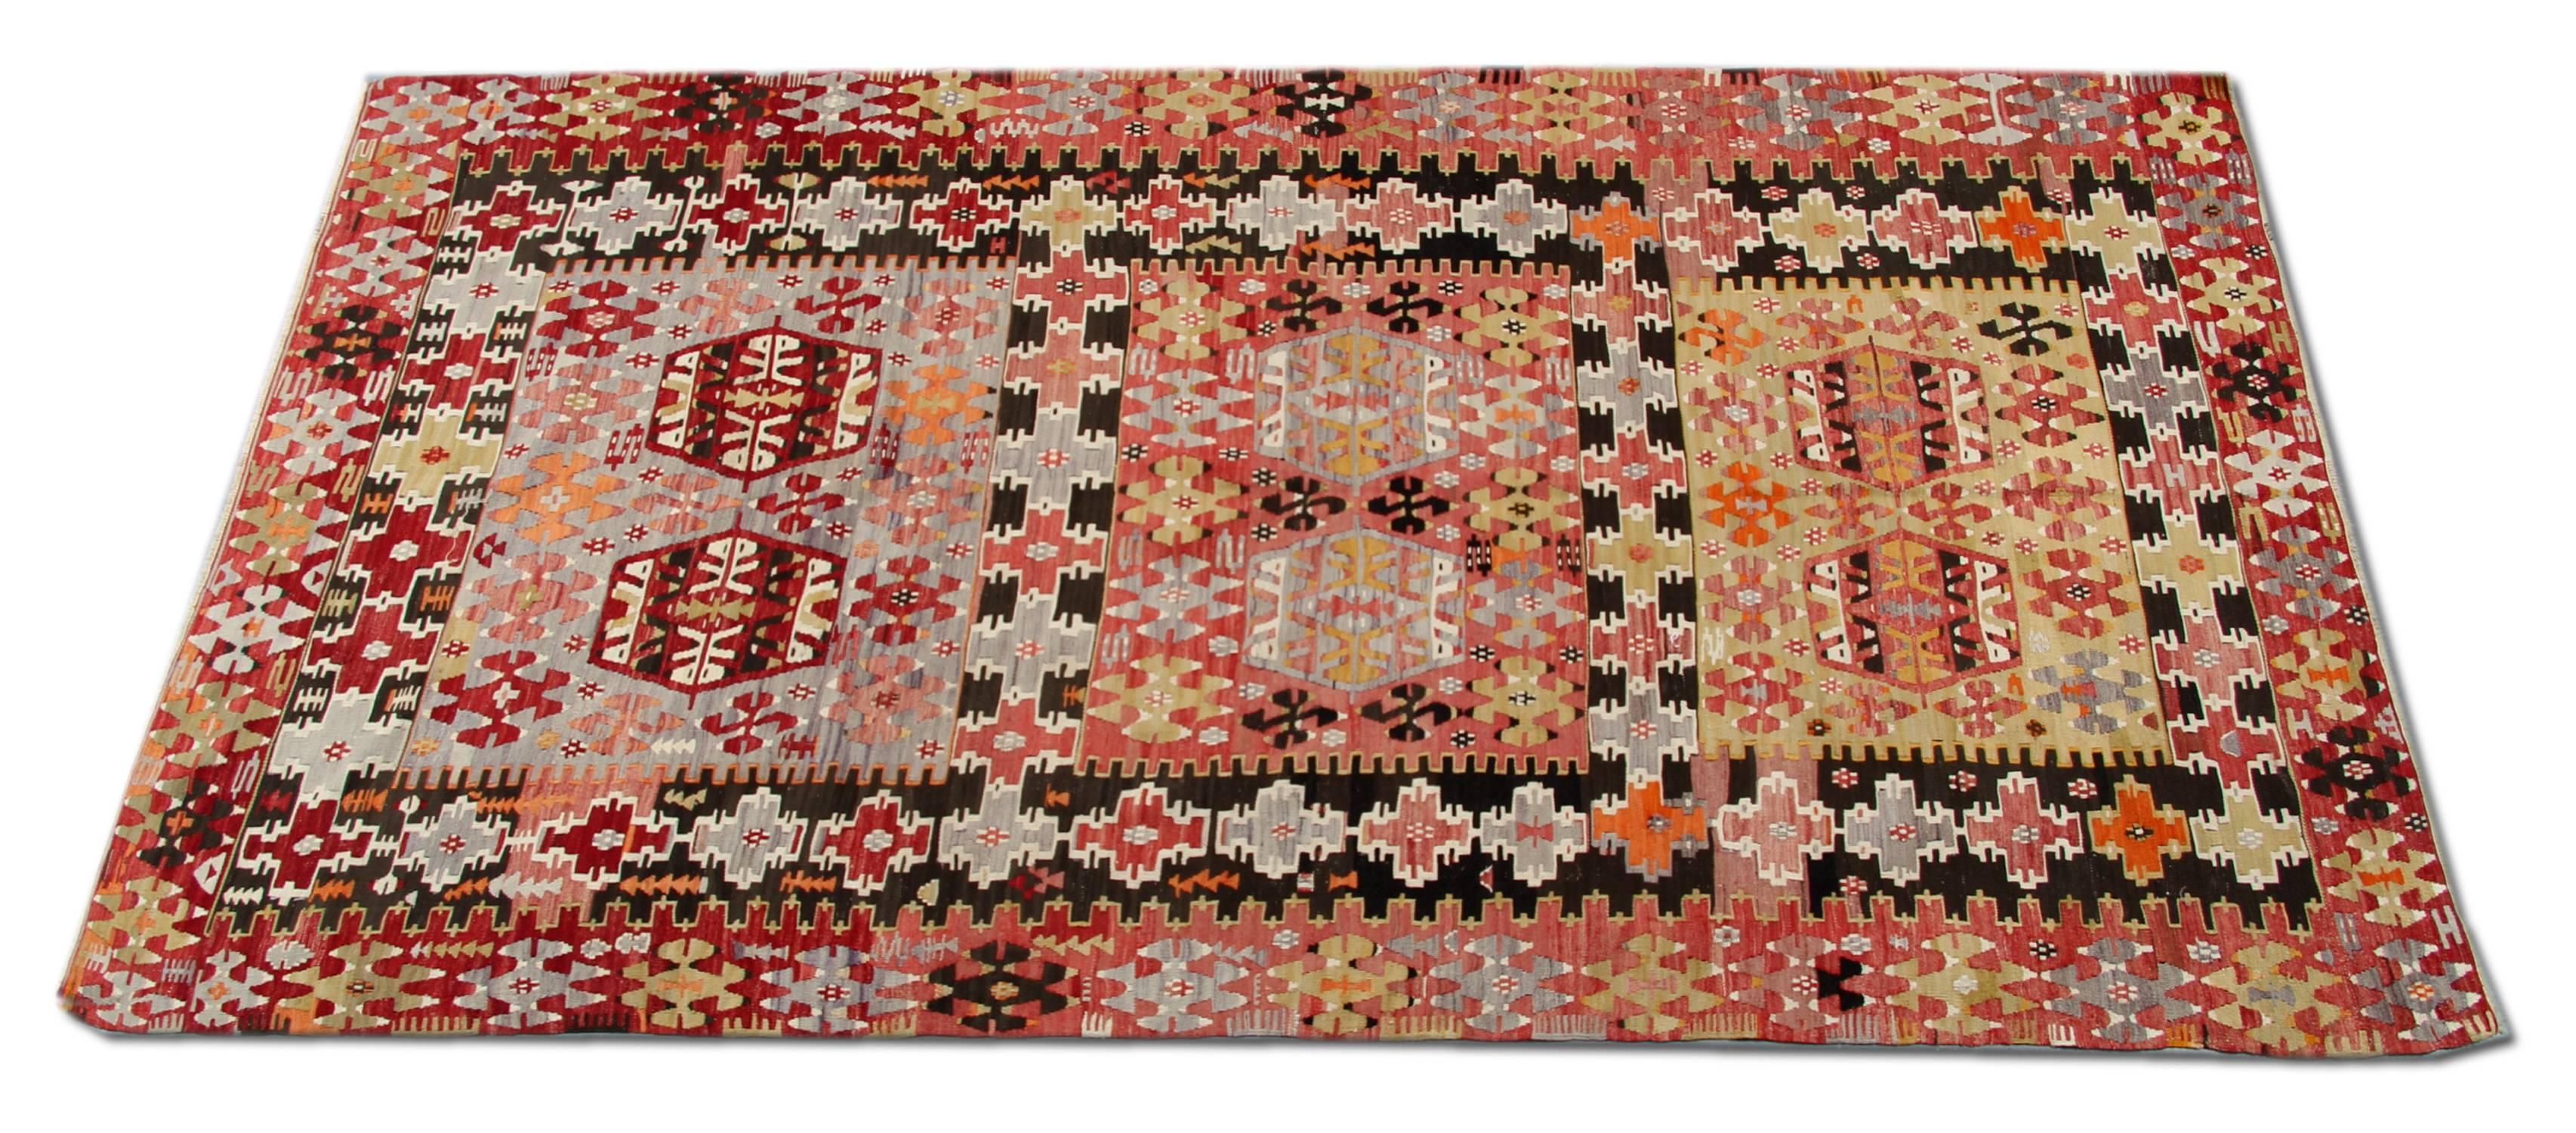 This handmade carpet floor rug is a Turkish carpet oriental rug has woven by very skilled weavers in Turkey, who used the highest quality wool and cotton. The flat-weave rug has light red, orange, grey-green, white, gold, yellow and dark brown